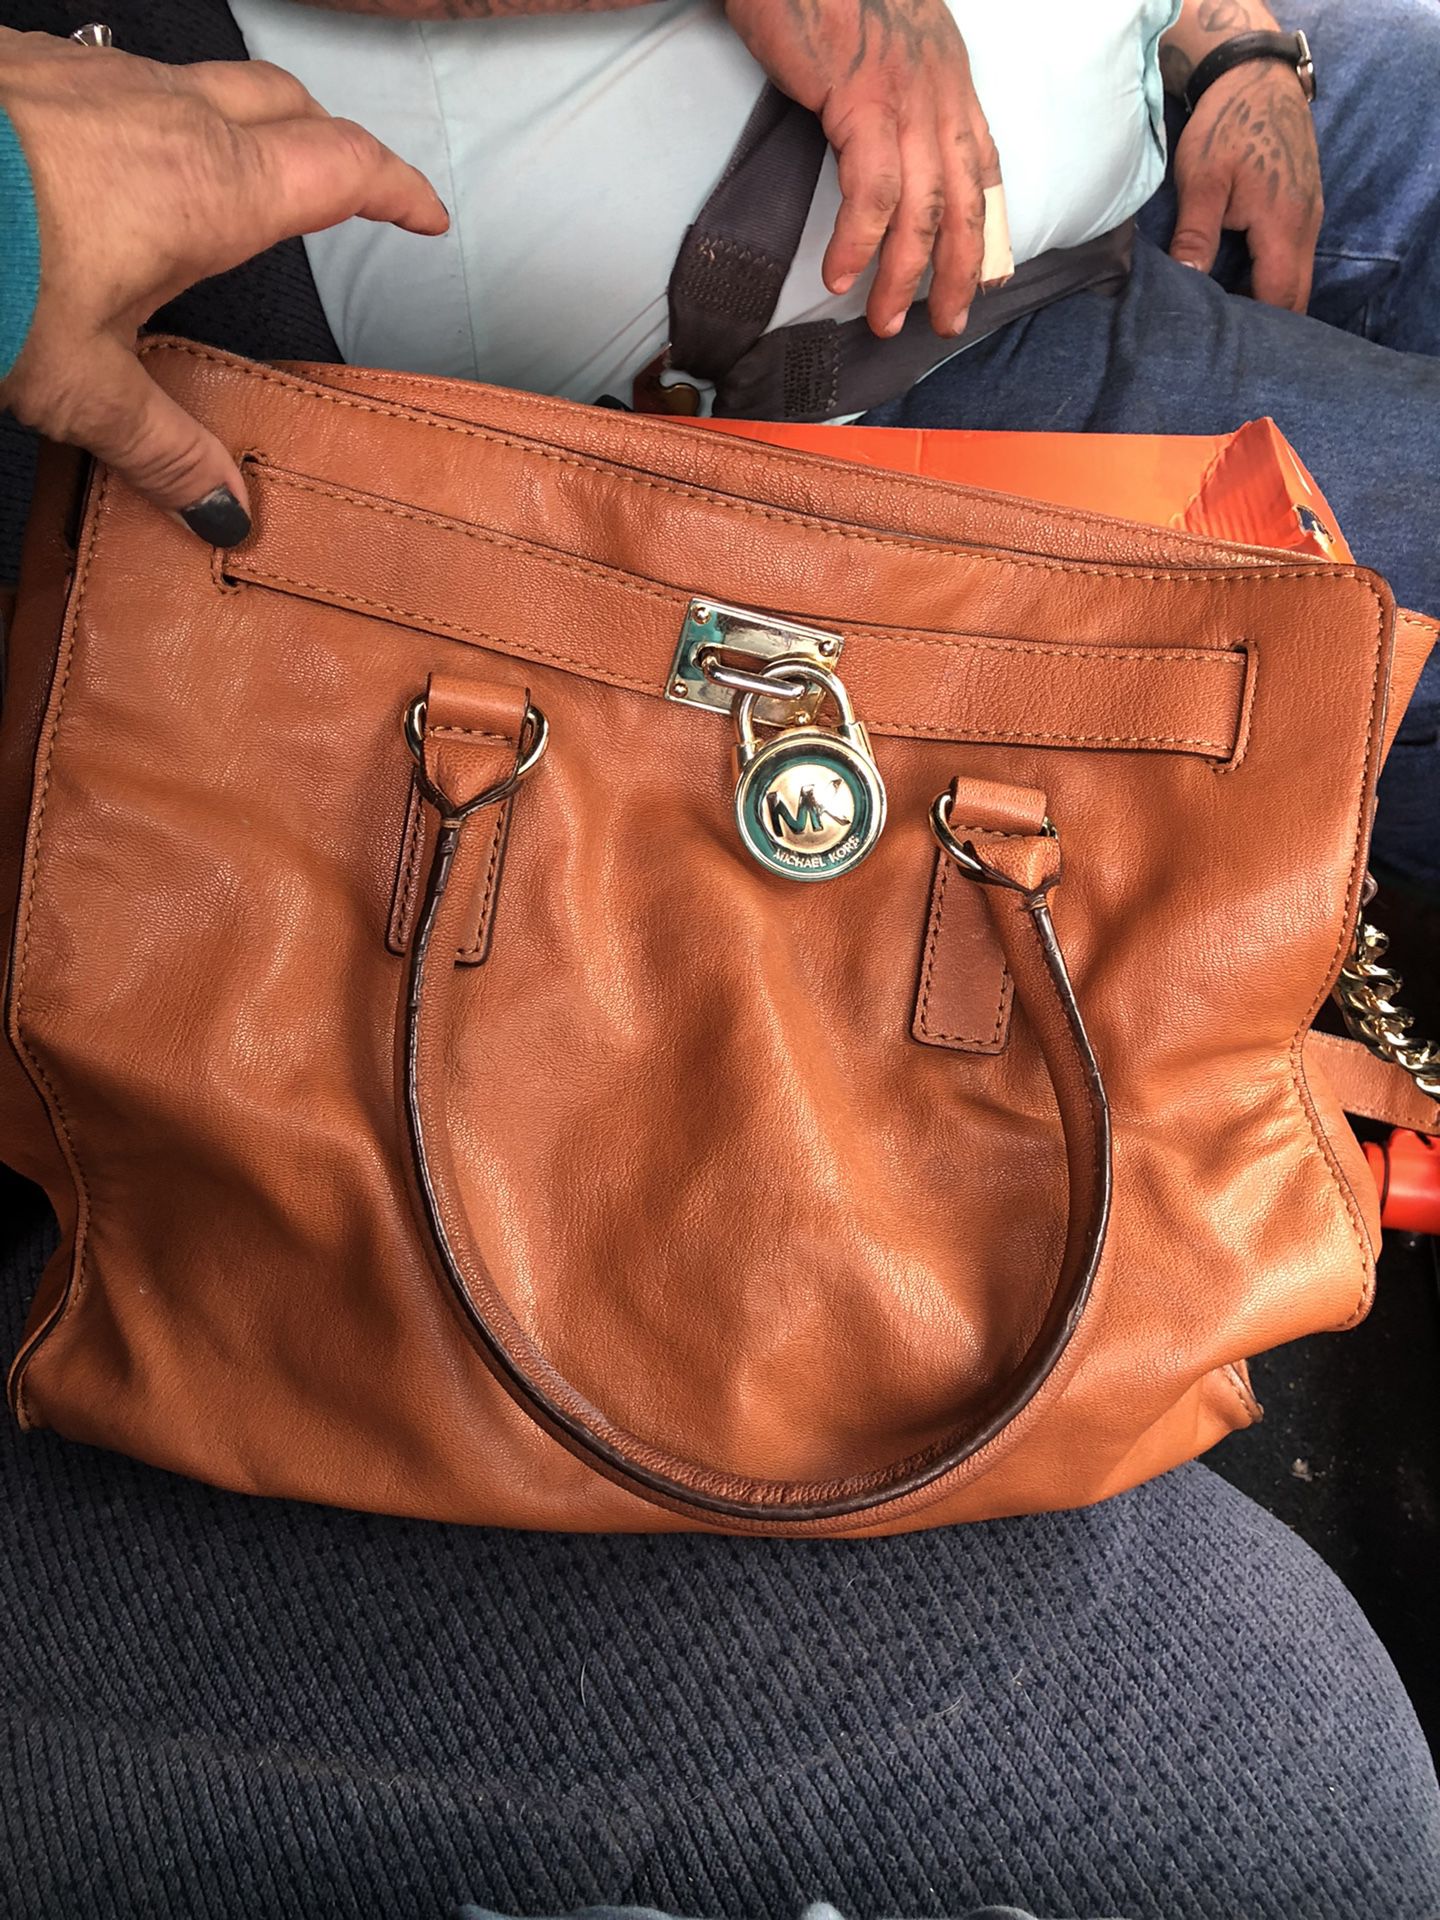 Michael Kors Tote Brown Leather 